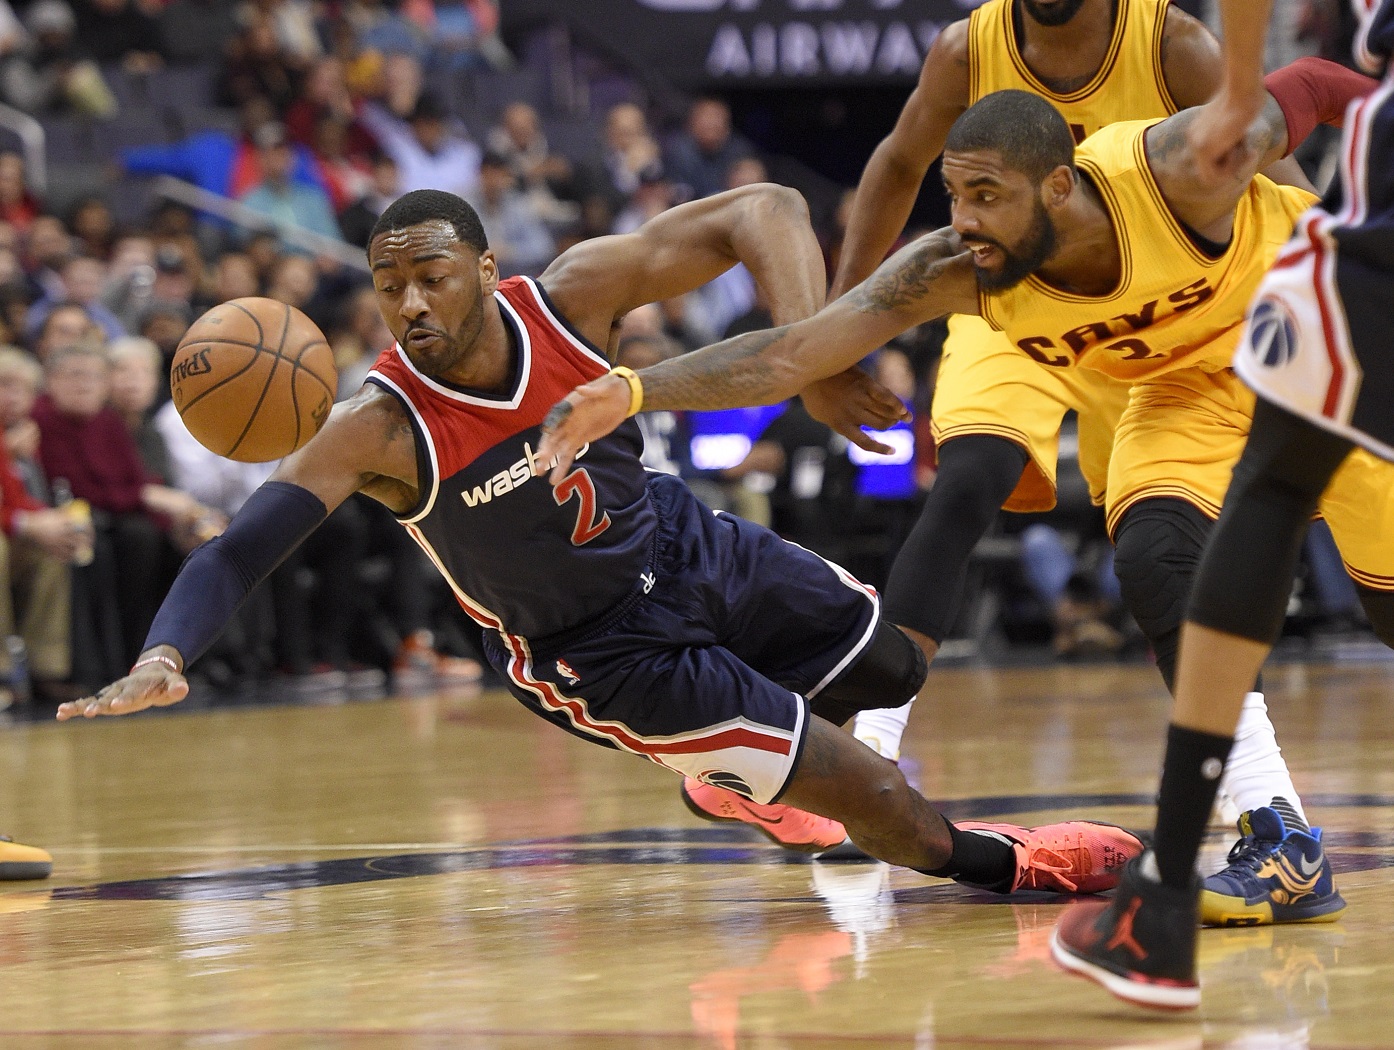 Washington Wizards guard John Wall, left, dives for a loose ball against Cleveland Cavaliers guard Kyrie Irving, right, during the first half of an NBA basketball game, Monday, Feb. 6, 2017, in Washington. (AP Photo/Nick Wass)